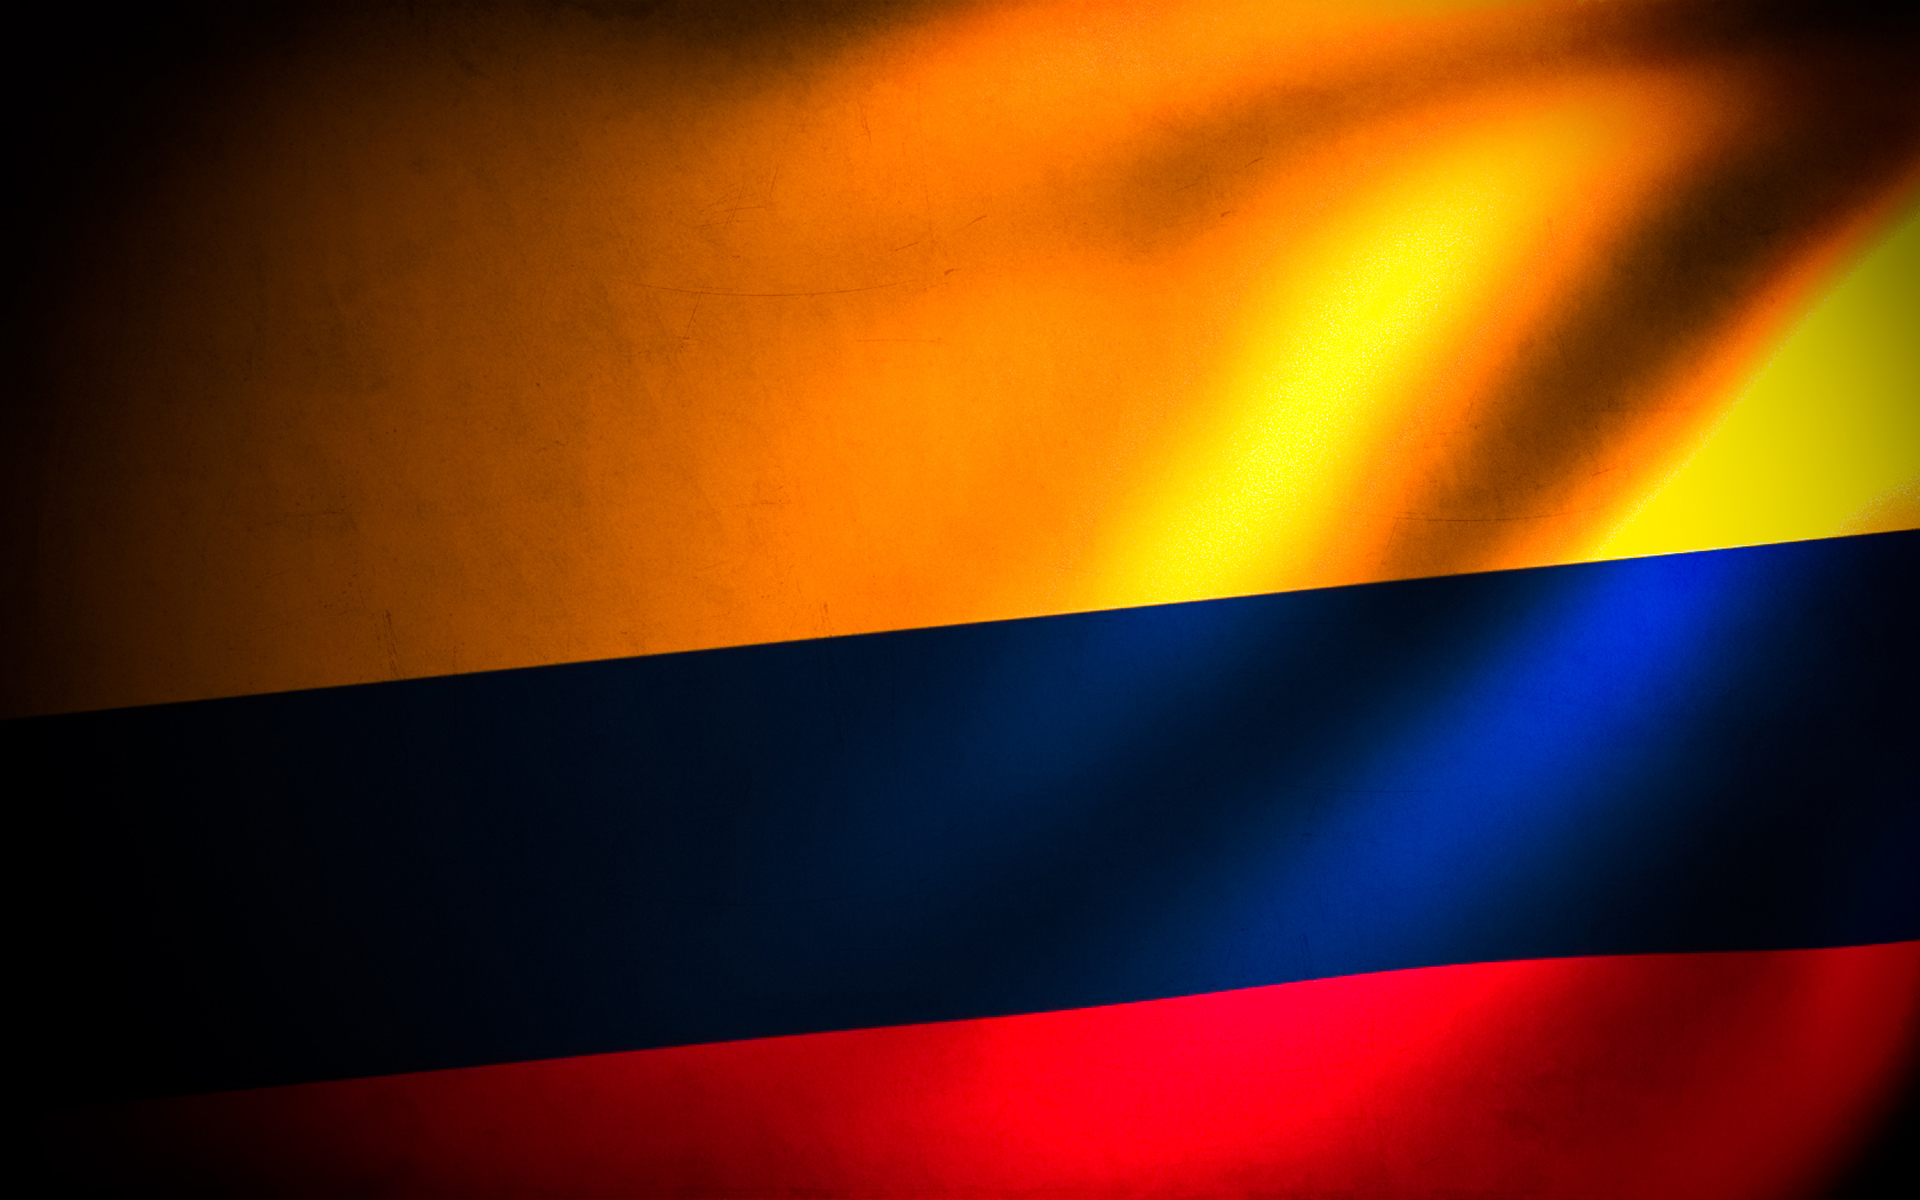 Image gallery for colombian flag wallpaper 1920x1200